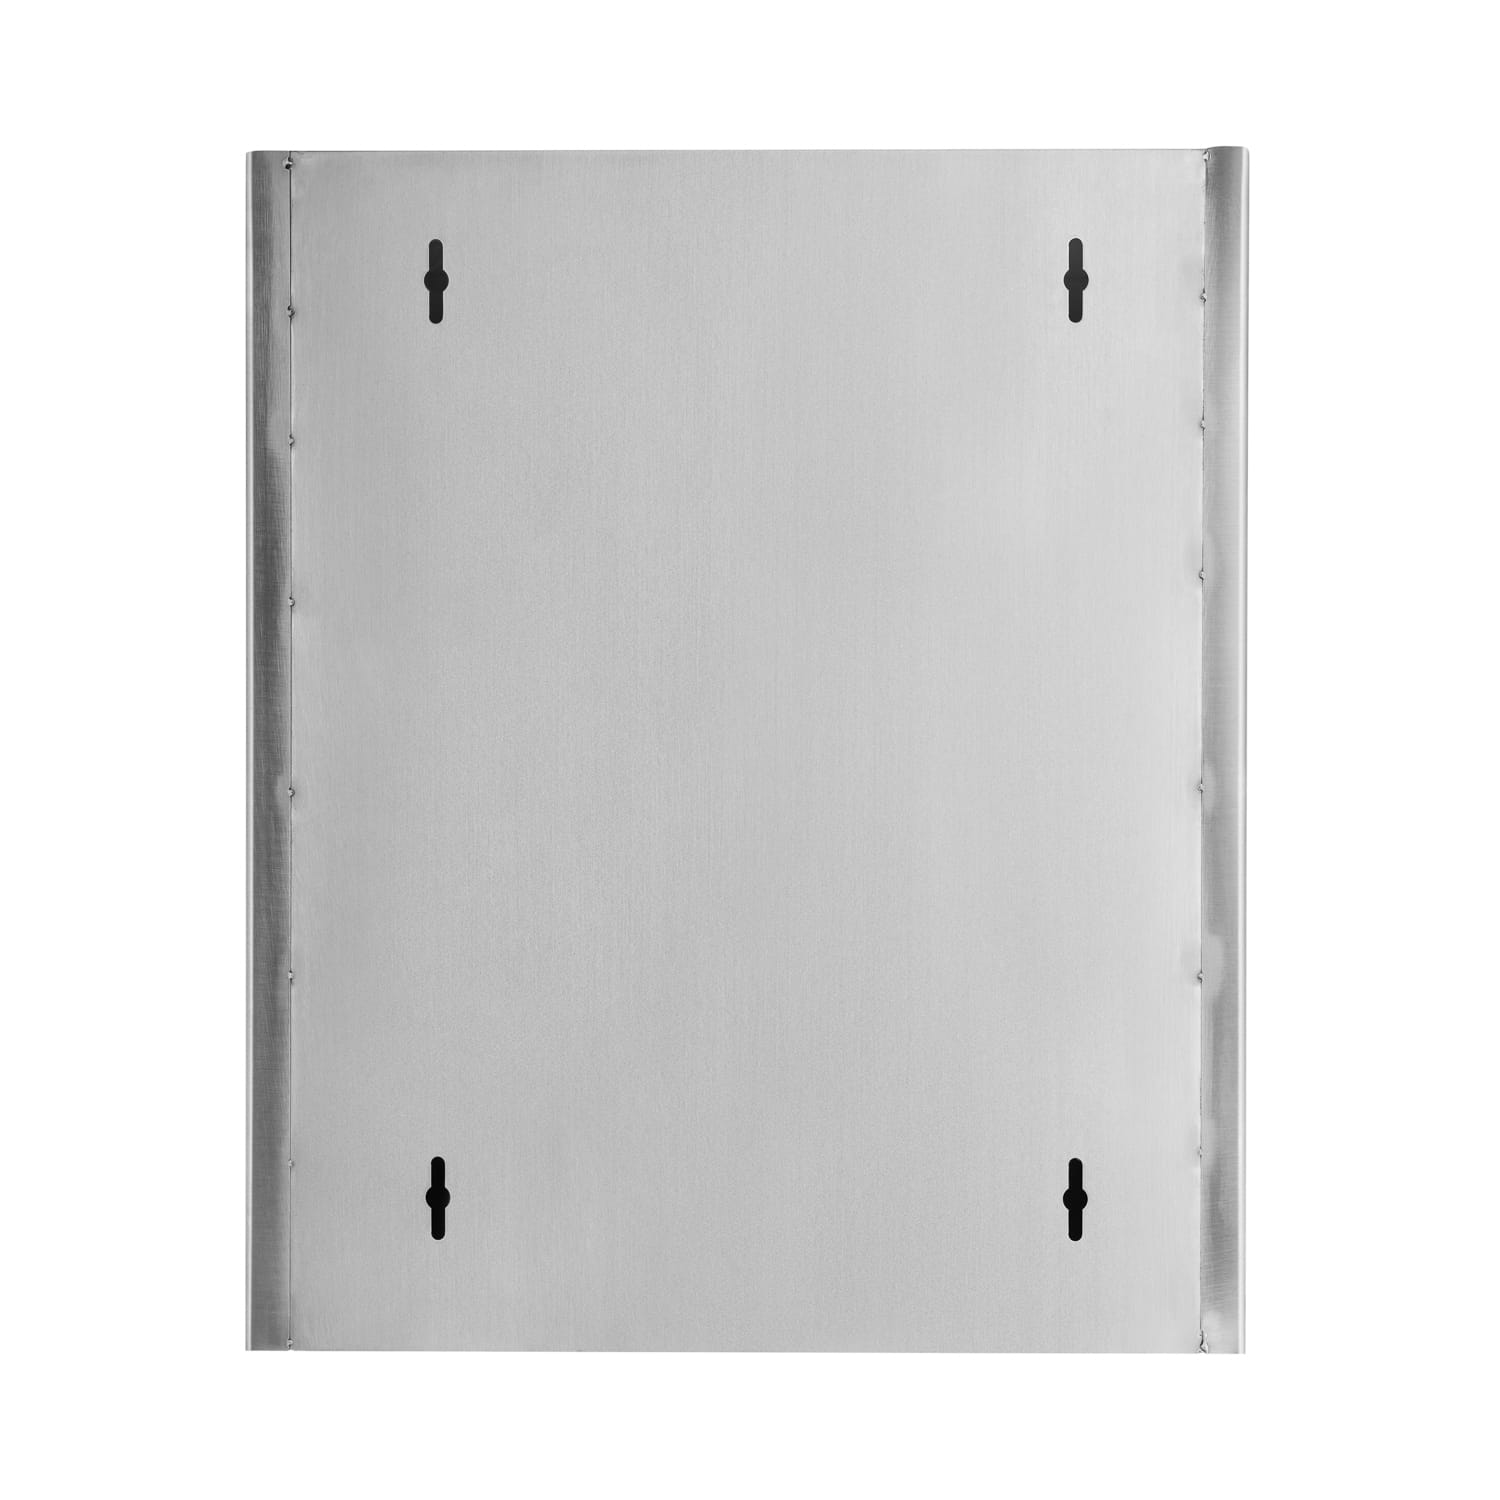 Waste bin wall-mounted, Impeco - stainless steel